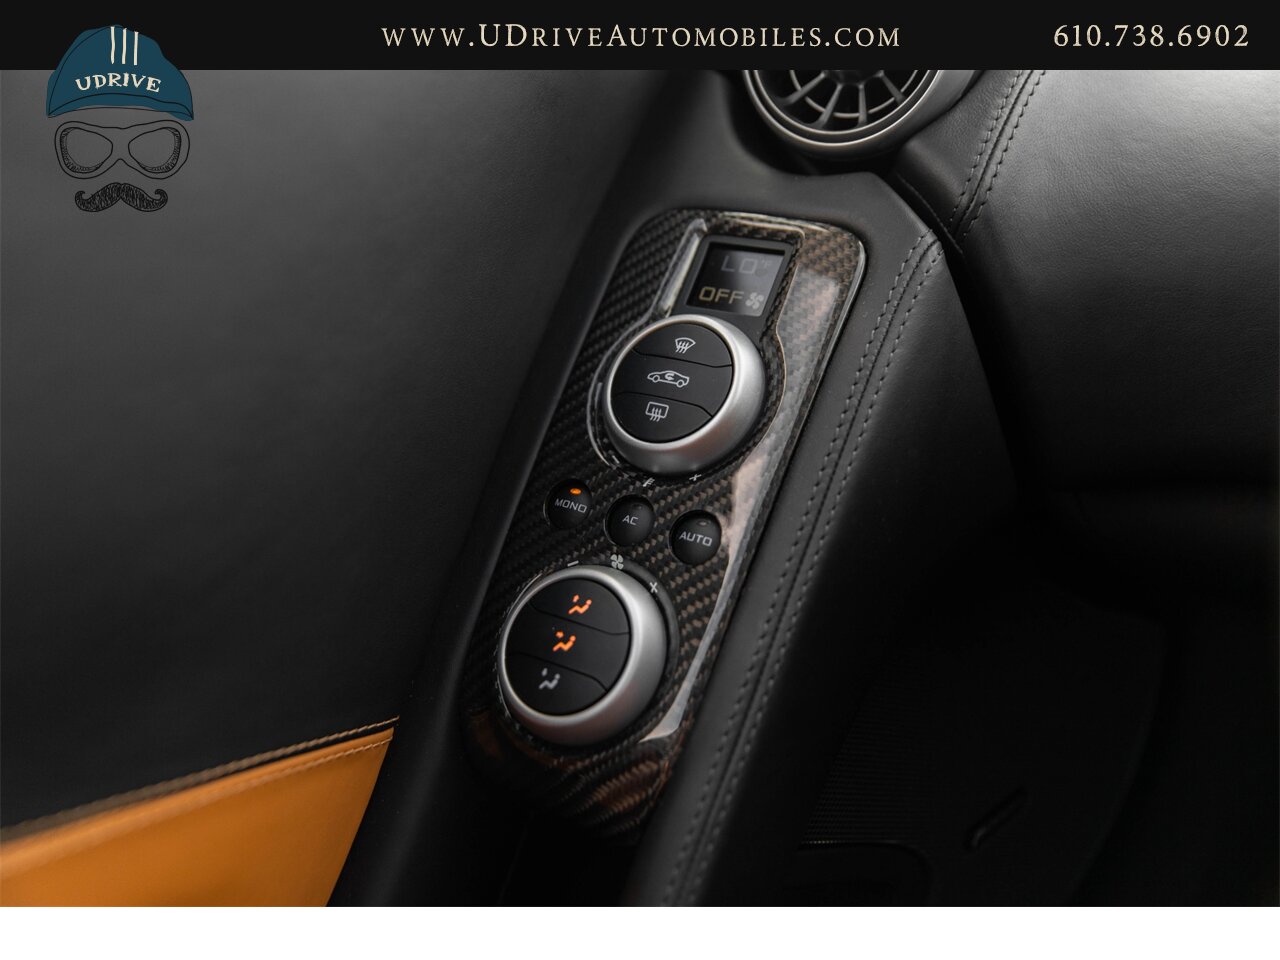 2013 McLaren MP4-12C Spider 1 Owner 6k Miles Carbon Fiber Full Leather  Sapphire Black over Natural Tan Leather - Photo 36 - West Chester, PA 19382